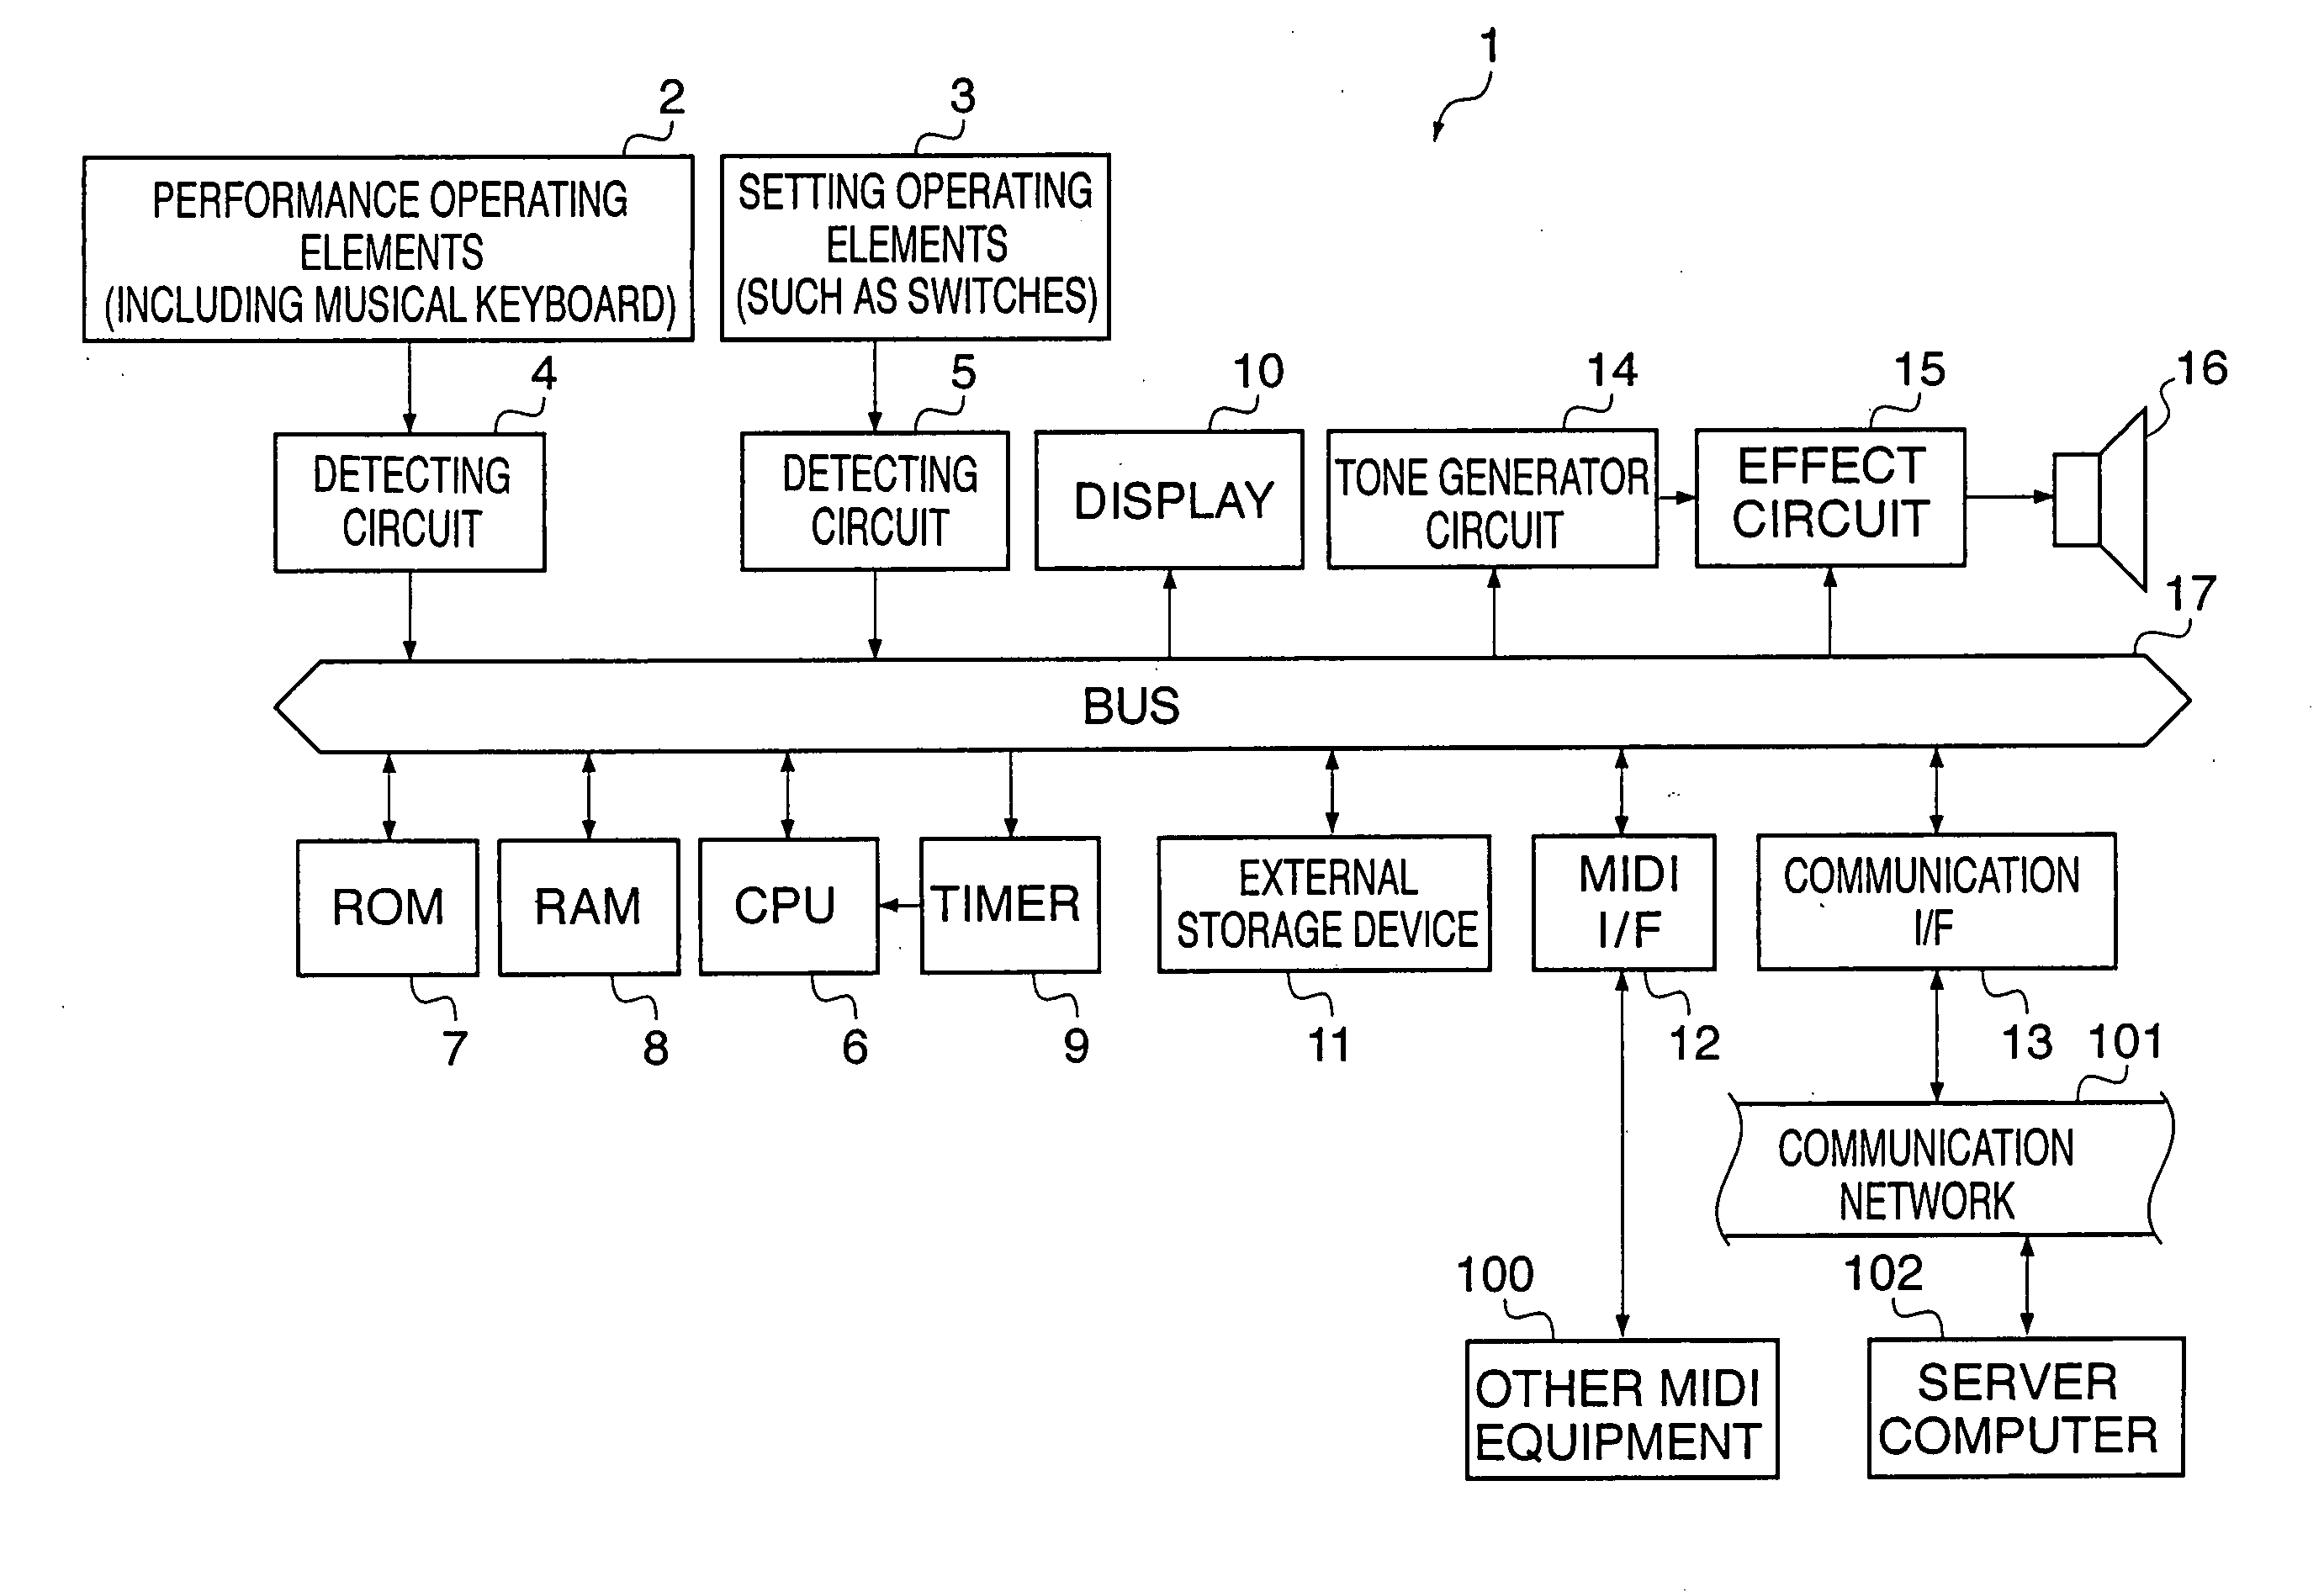 Automatic performance data reproducing apparatus, control method therefor, and program for implementing the control method